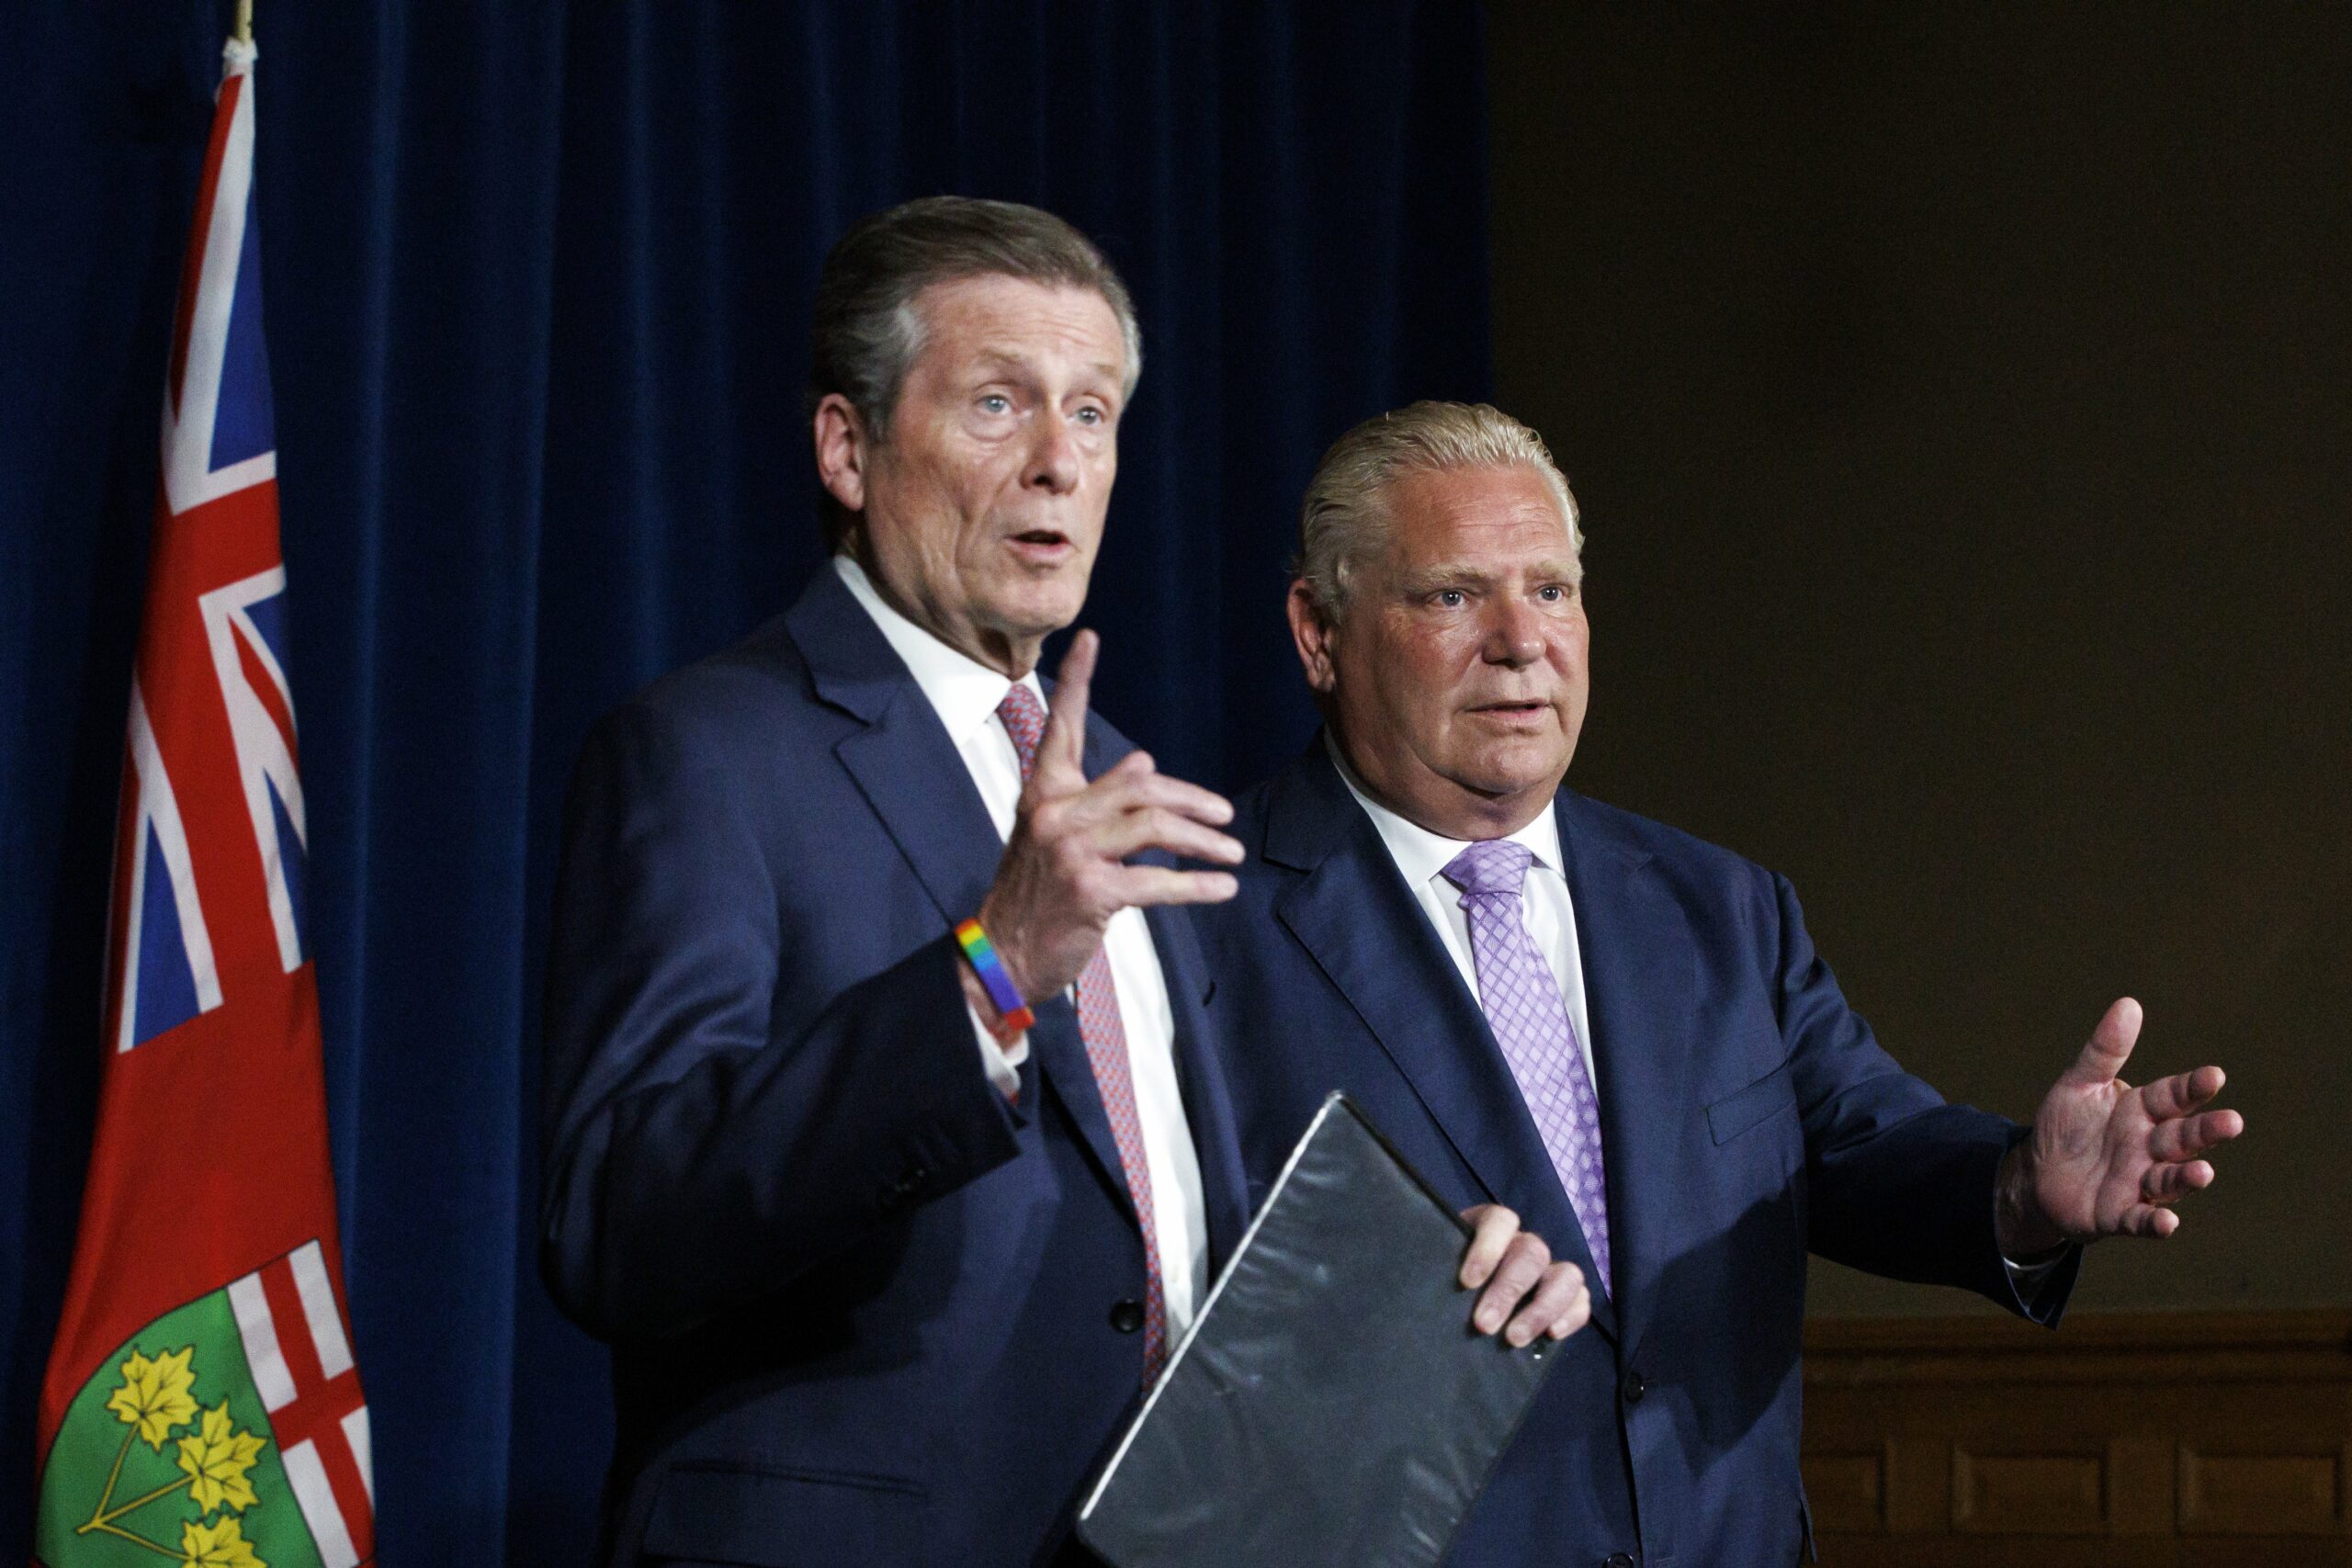 Other Ontario big-city mayors say they'd also like more power